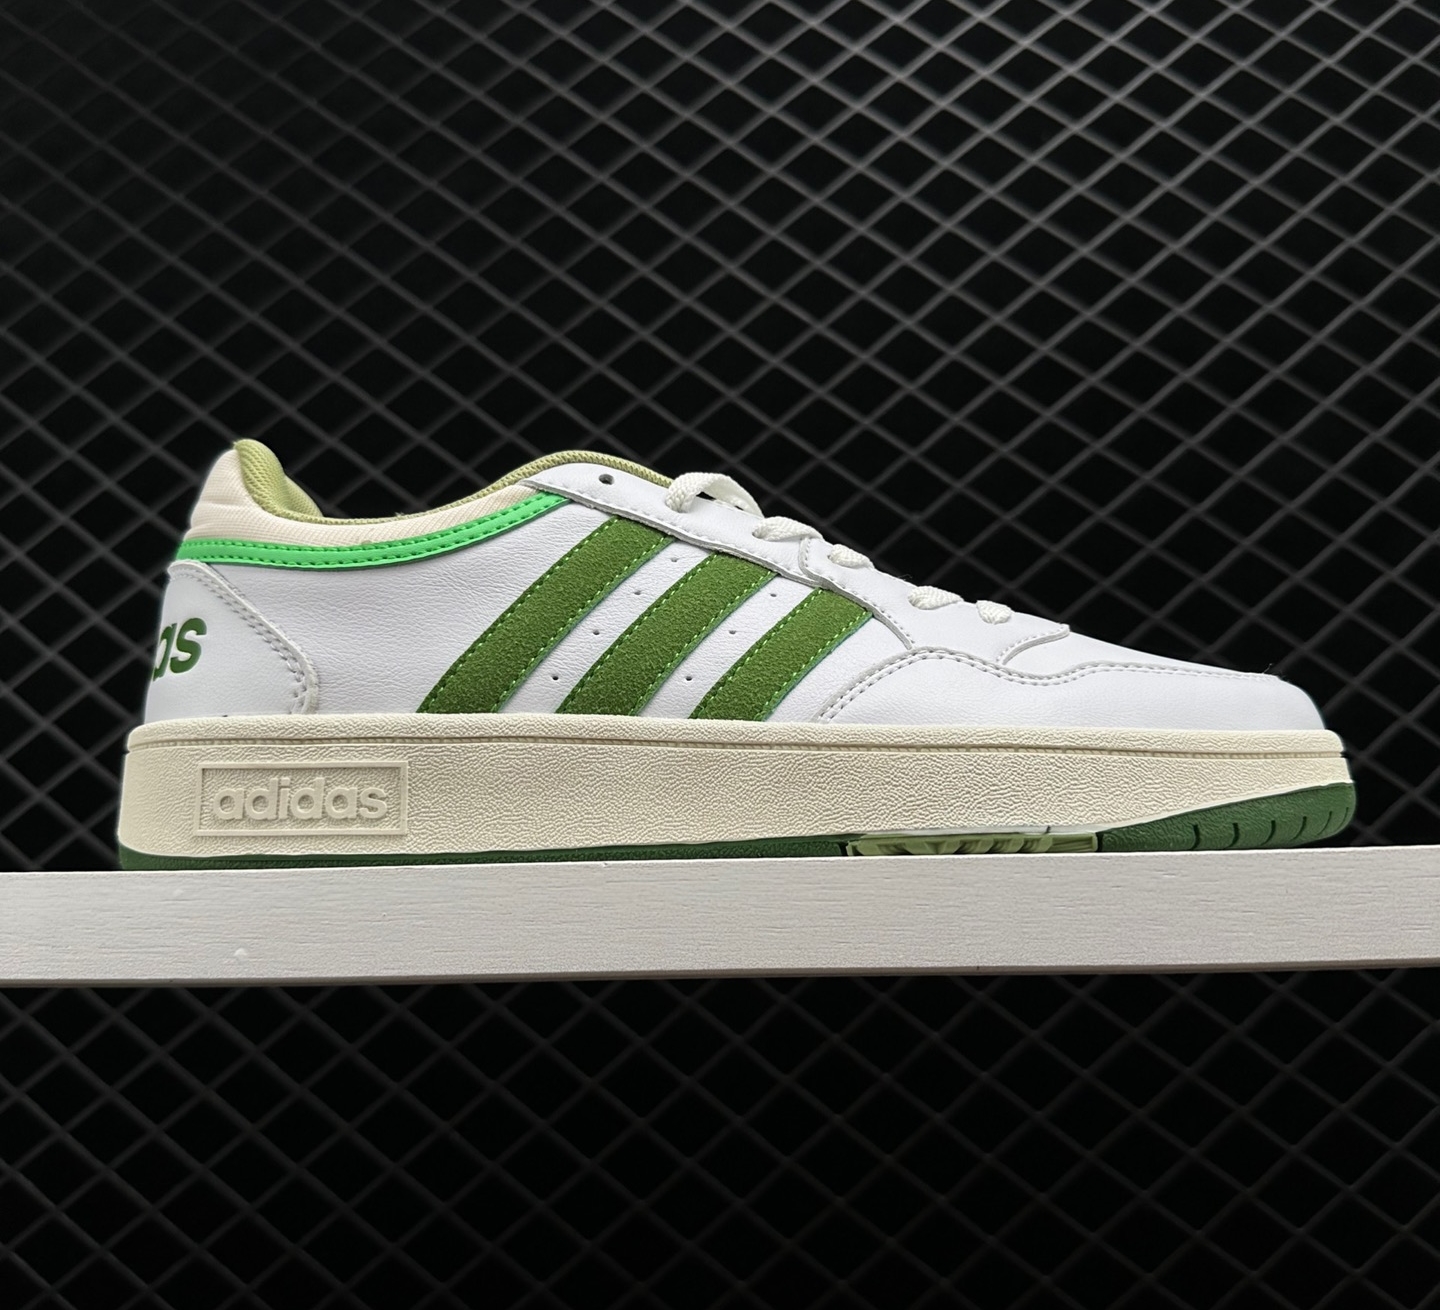 Adidas Neo Hoops 3.0 'White Green' GX9773 - Stylish and Athletic Footwear